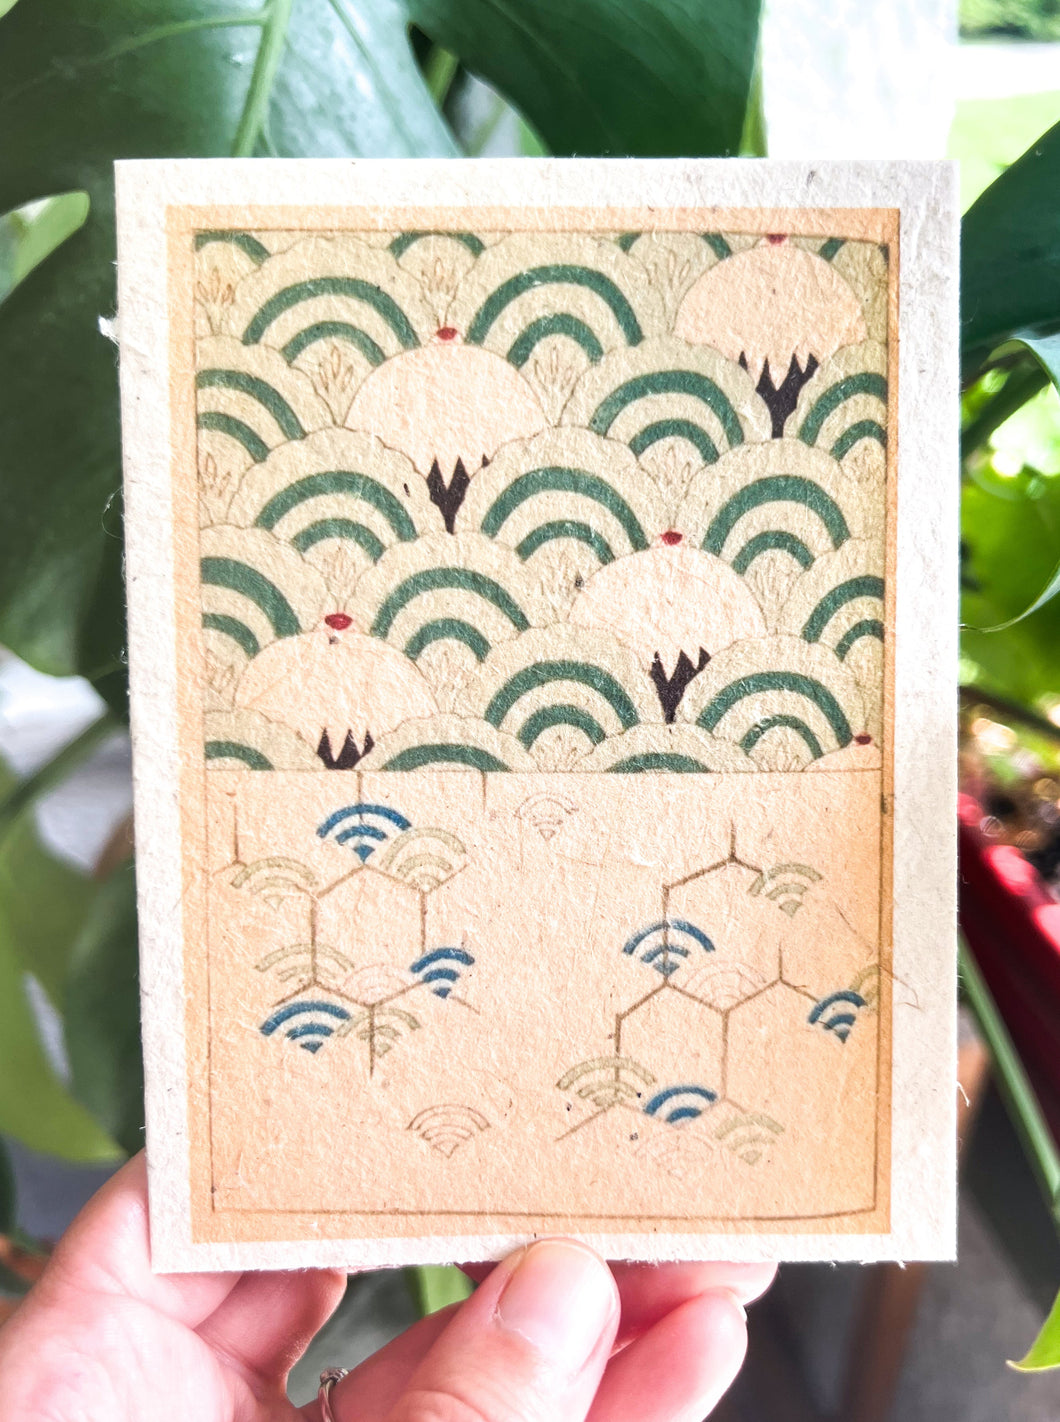 Japanese Plantable Seed Card || Zero Waste || Supports Women || Eco-friendly || J21